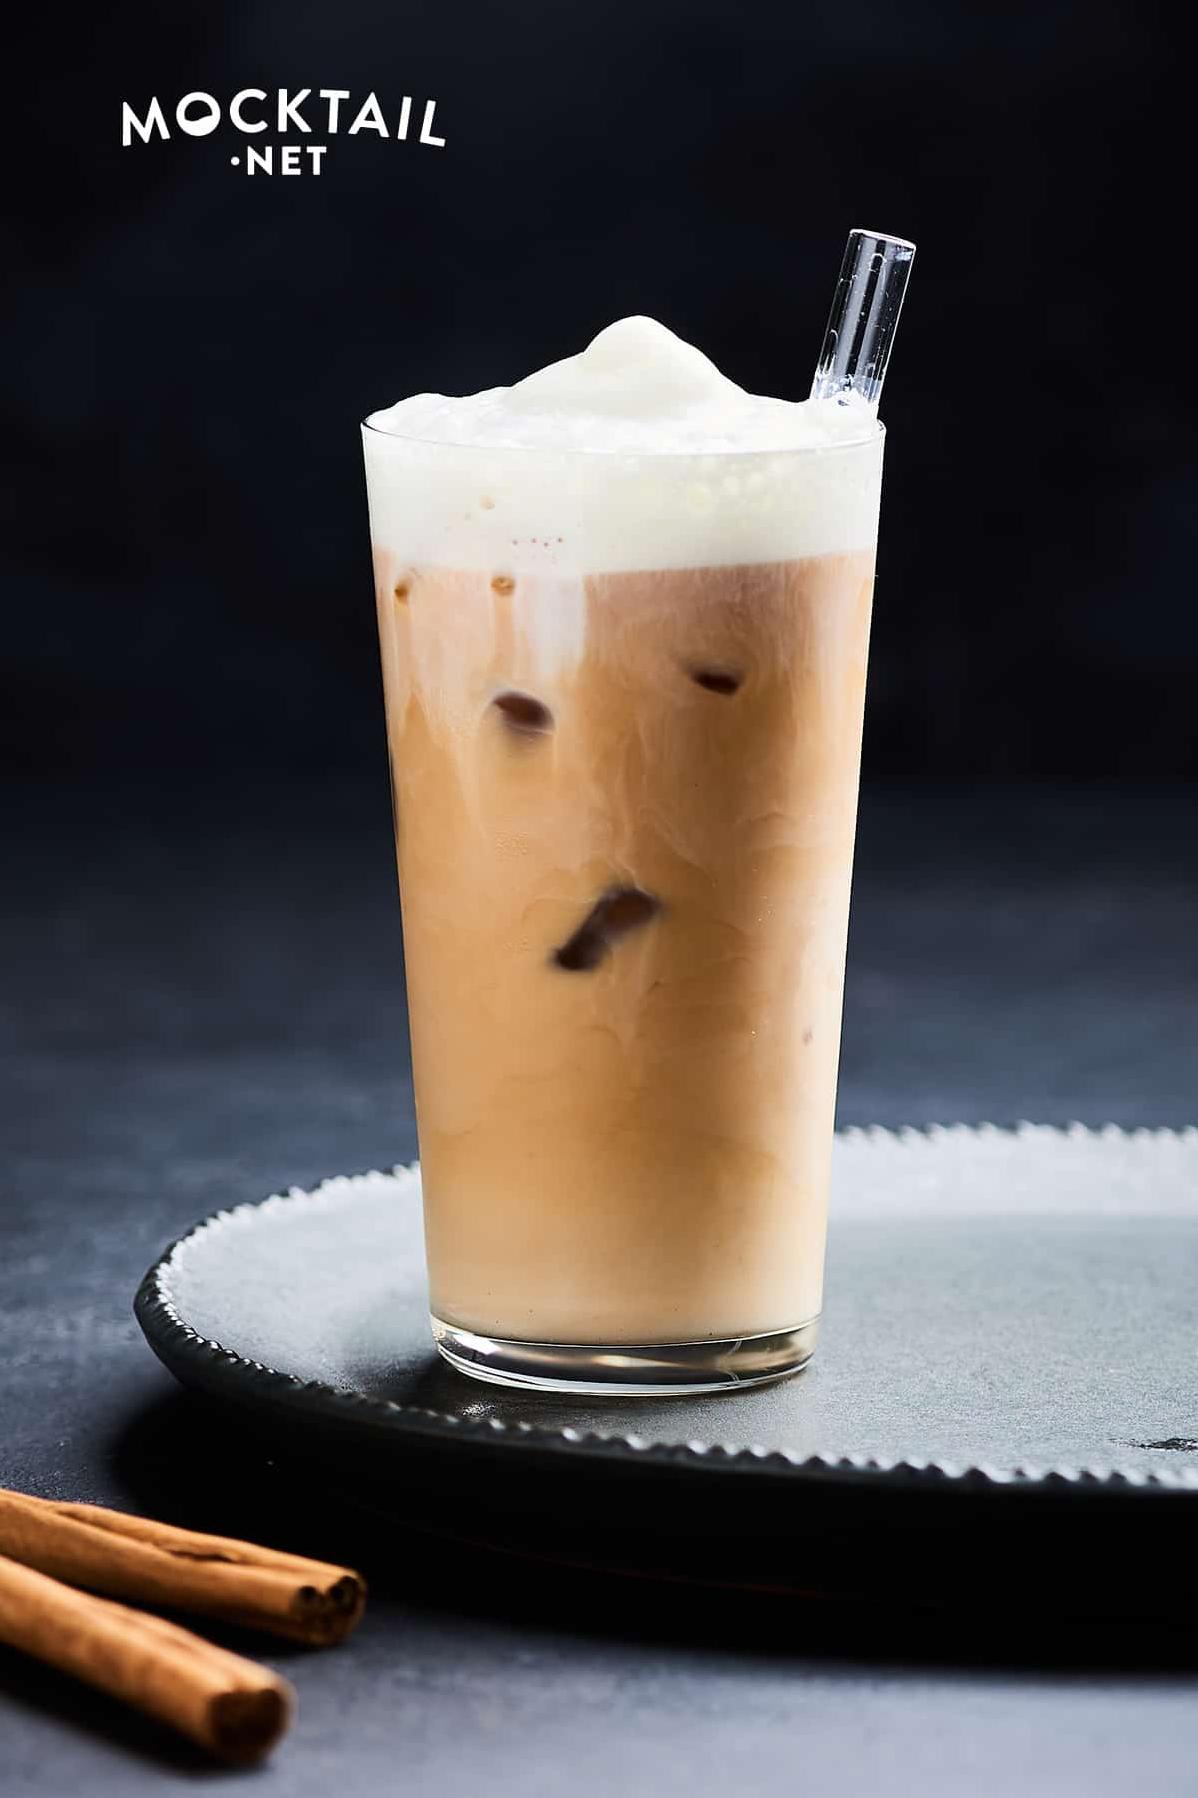  Who needs a beach when you can have our iced cappuccino in hand?